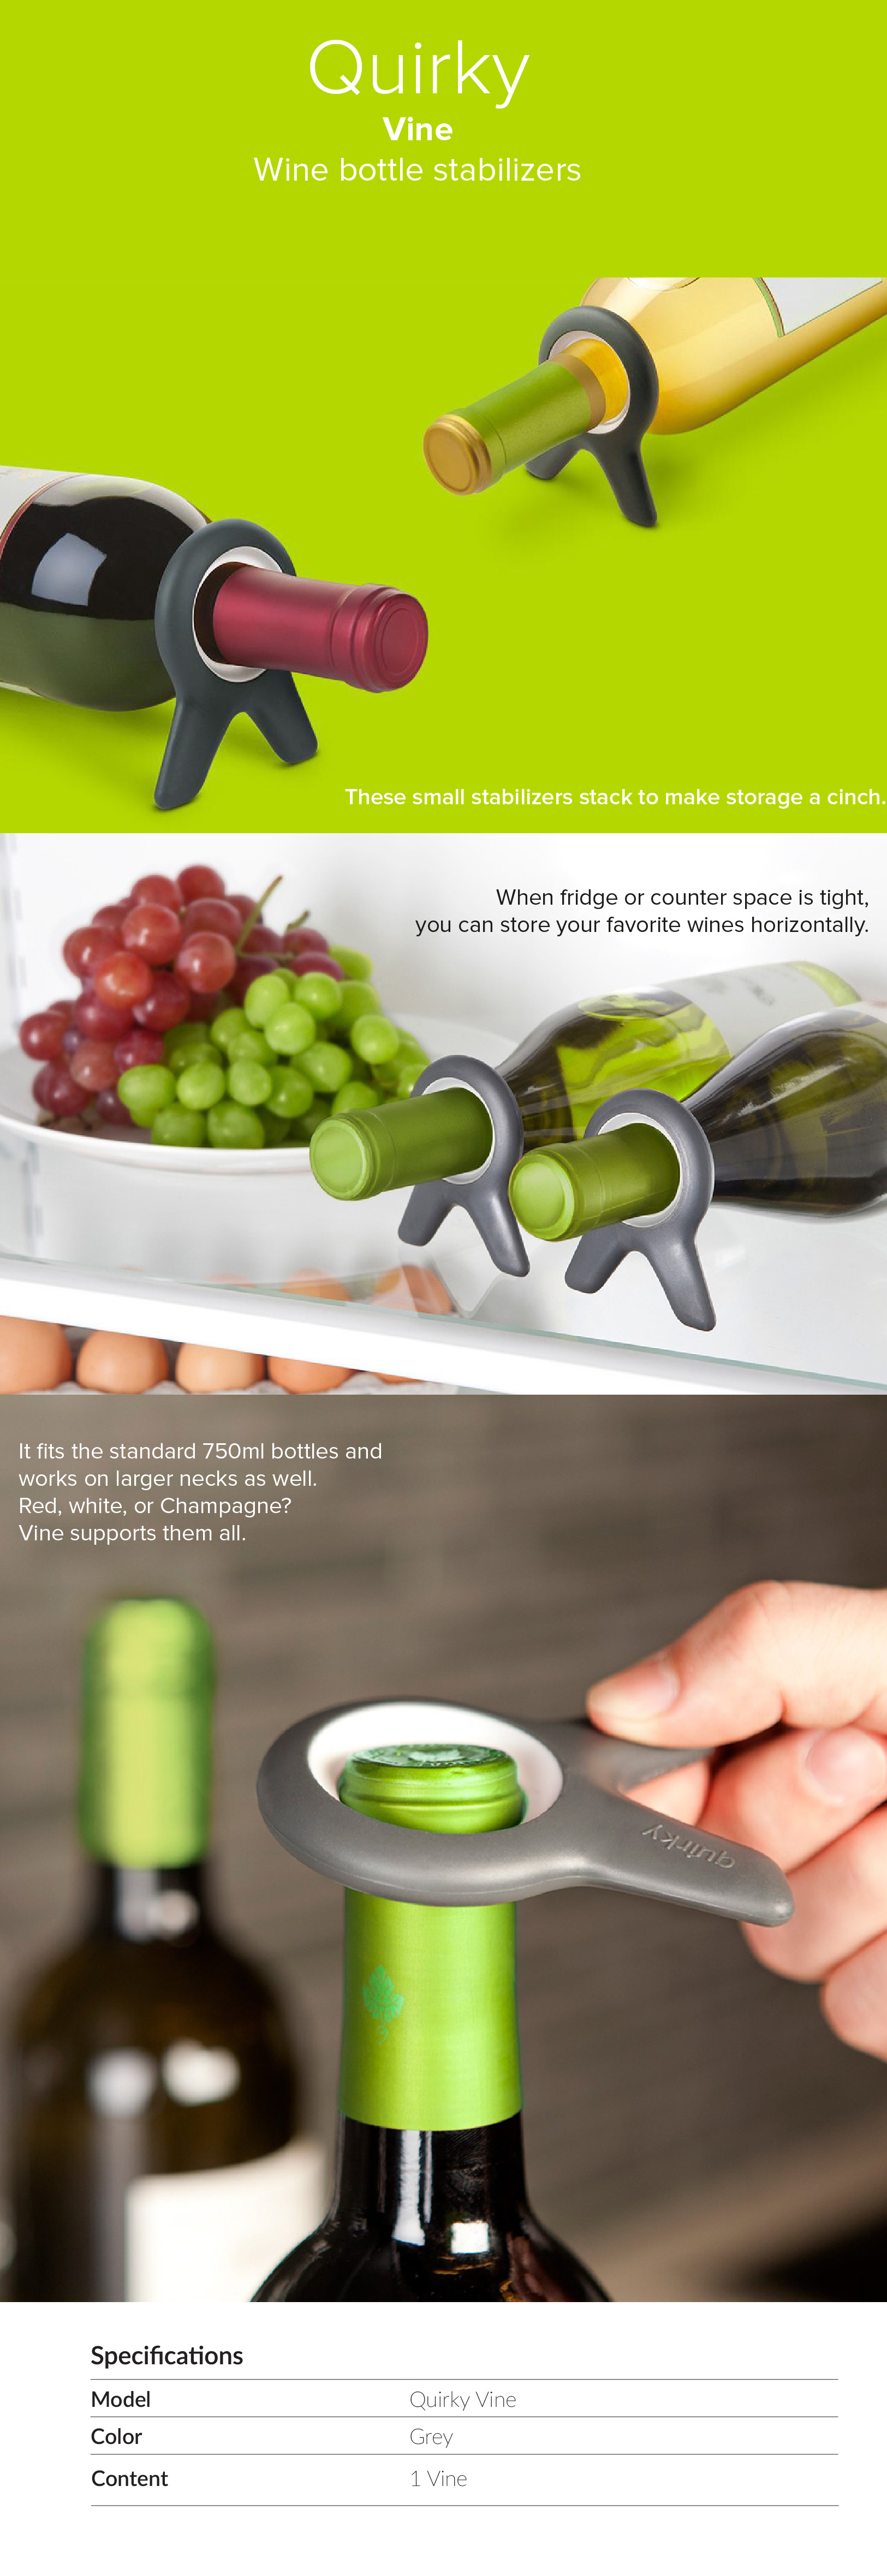 QUIRKY Vine (Wine Bottle Stabilizers) PD